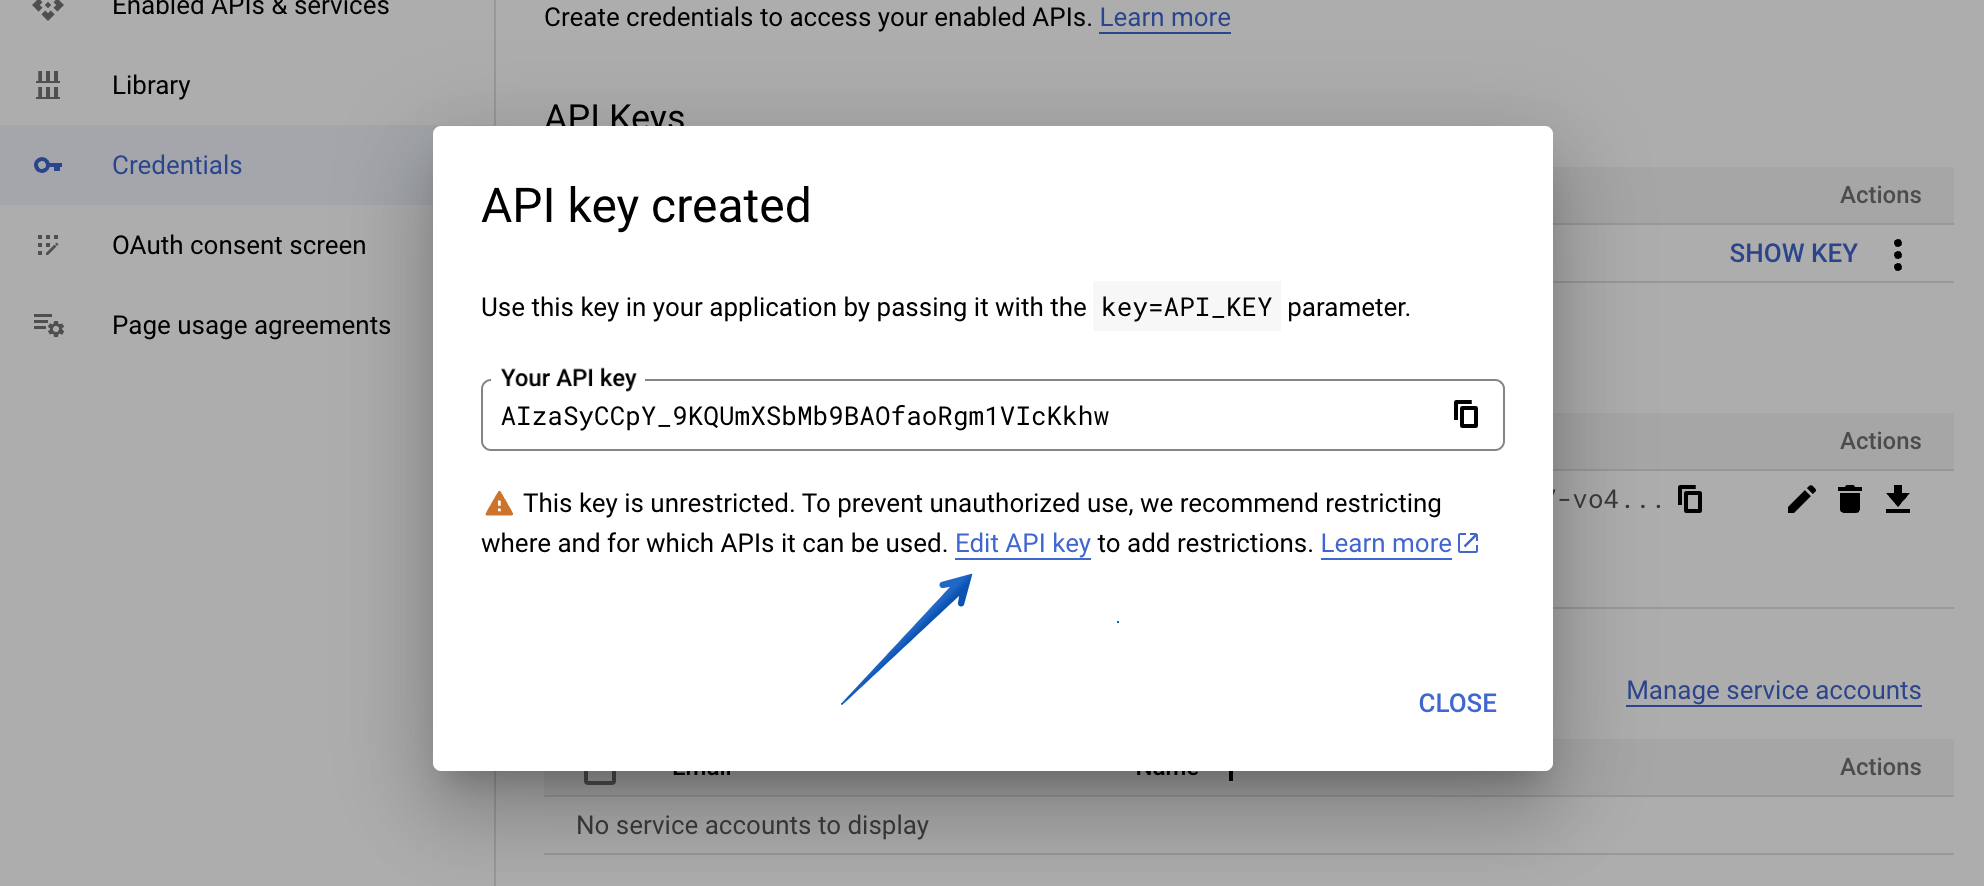 Copy and paste the displayed API key for future reference, then press Edit API key link, do not press Close